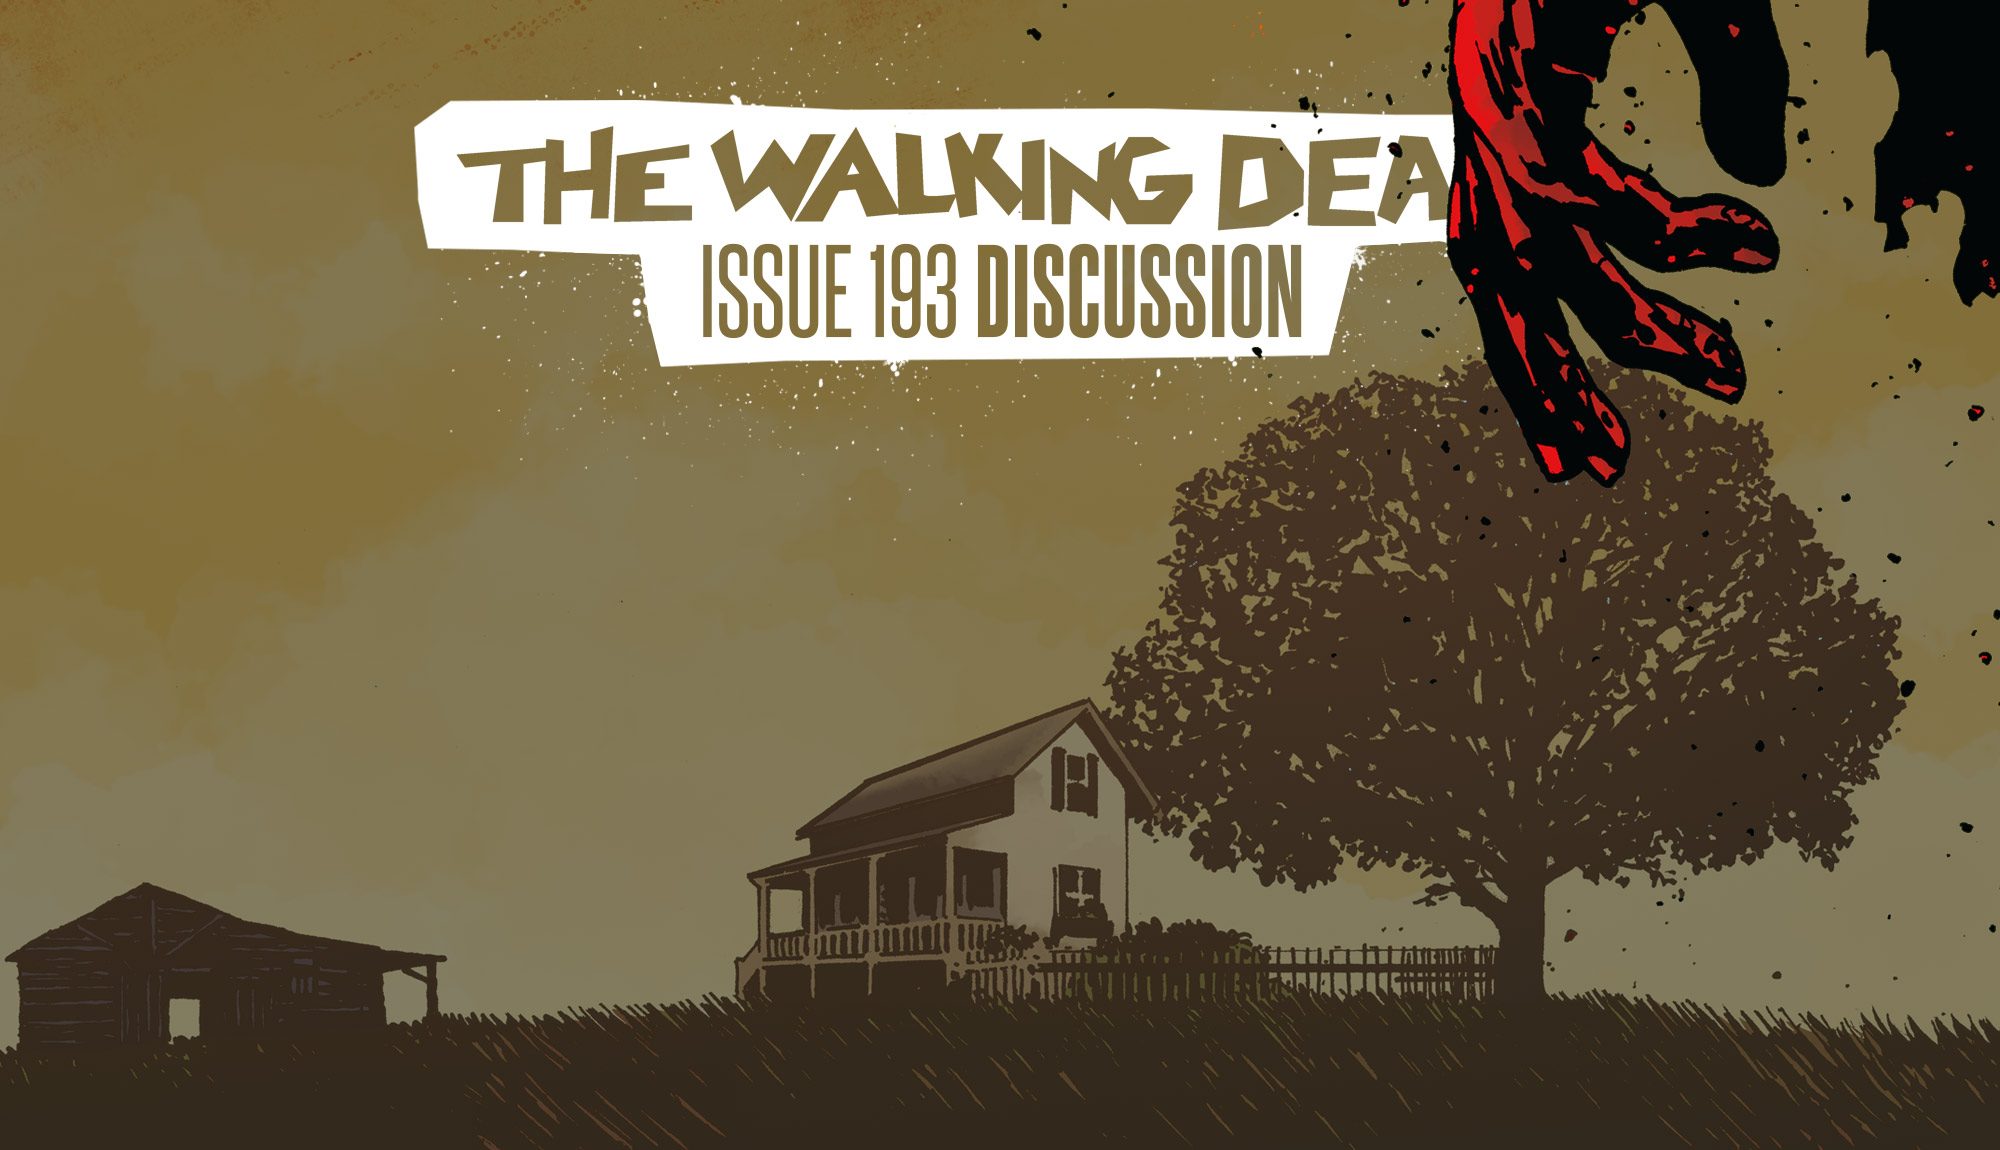 The Walking Dead Issue 193 “The Farmhouse” Reader Discussion